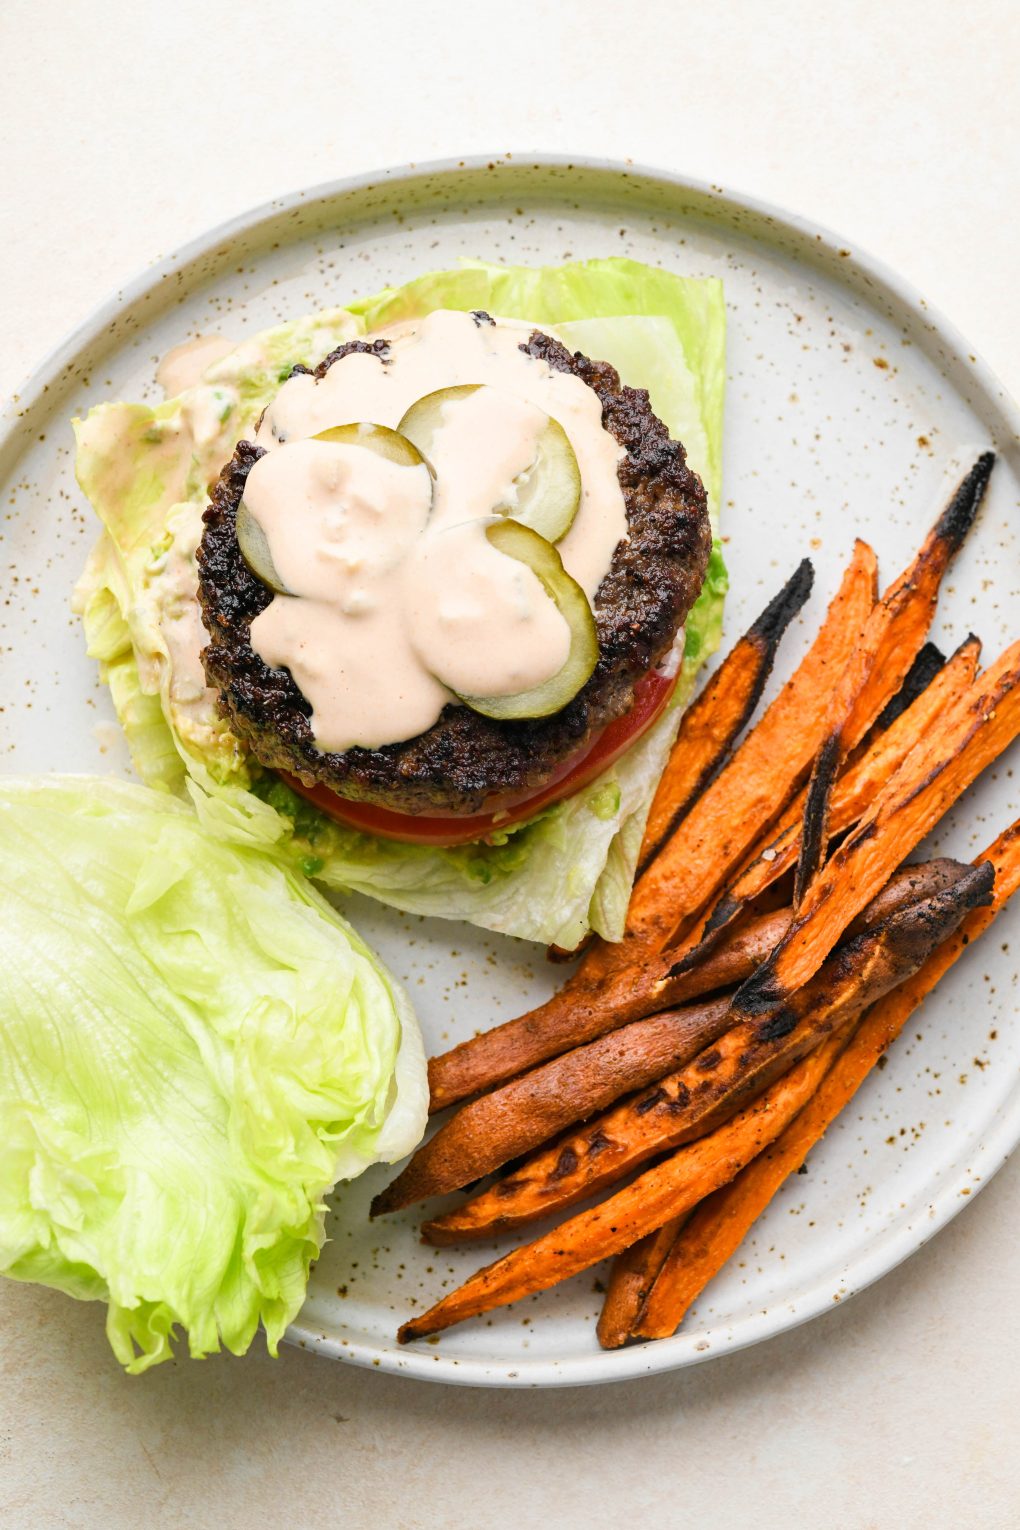 Overhead of a Lettuce Wrap Bunless Burger next to sweet potato fries on a white speckled plate.